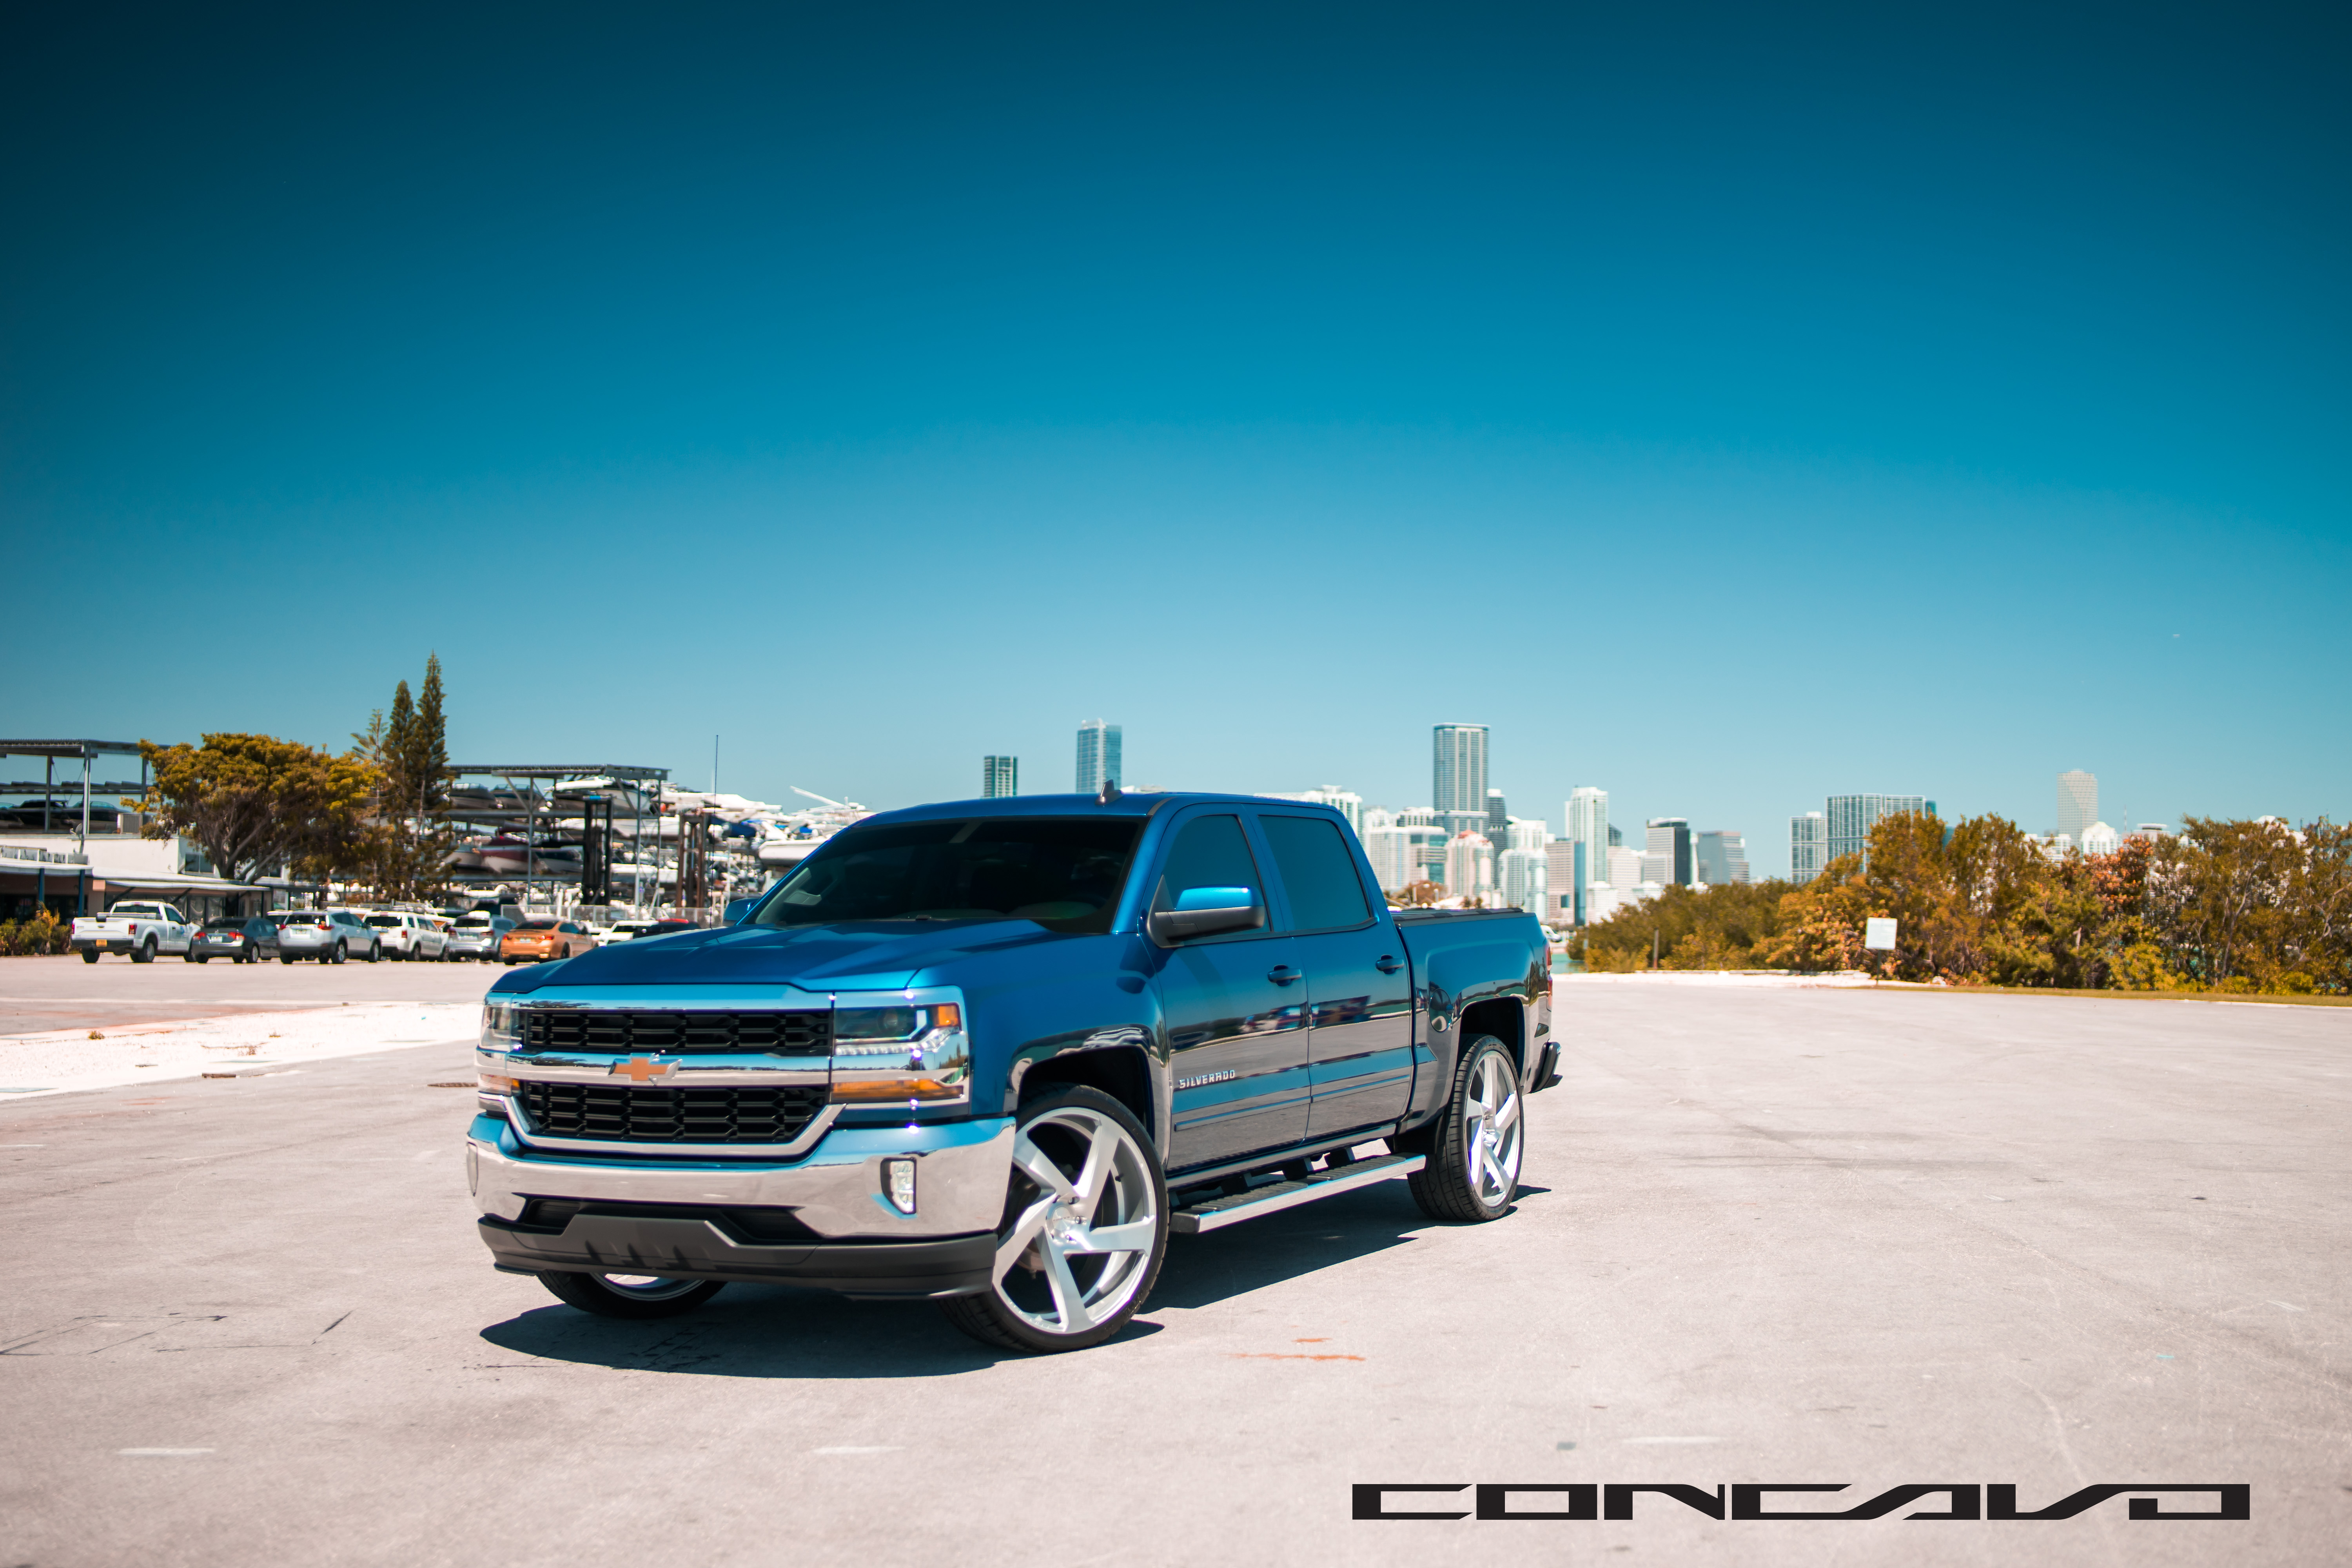 Chevrolet Silverado on 5D Brushed Silver.